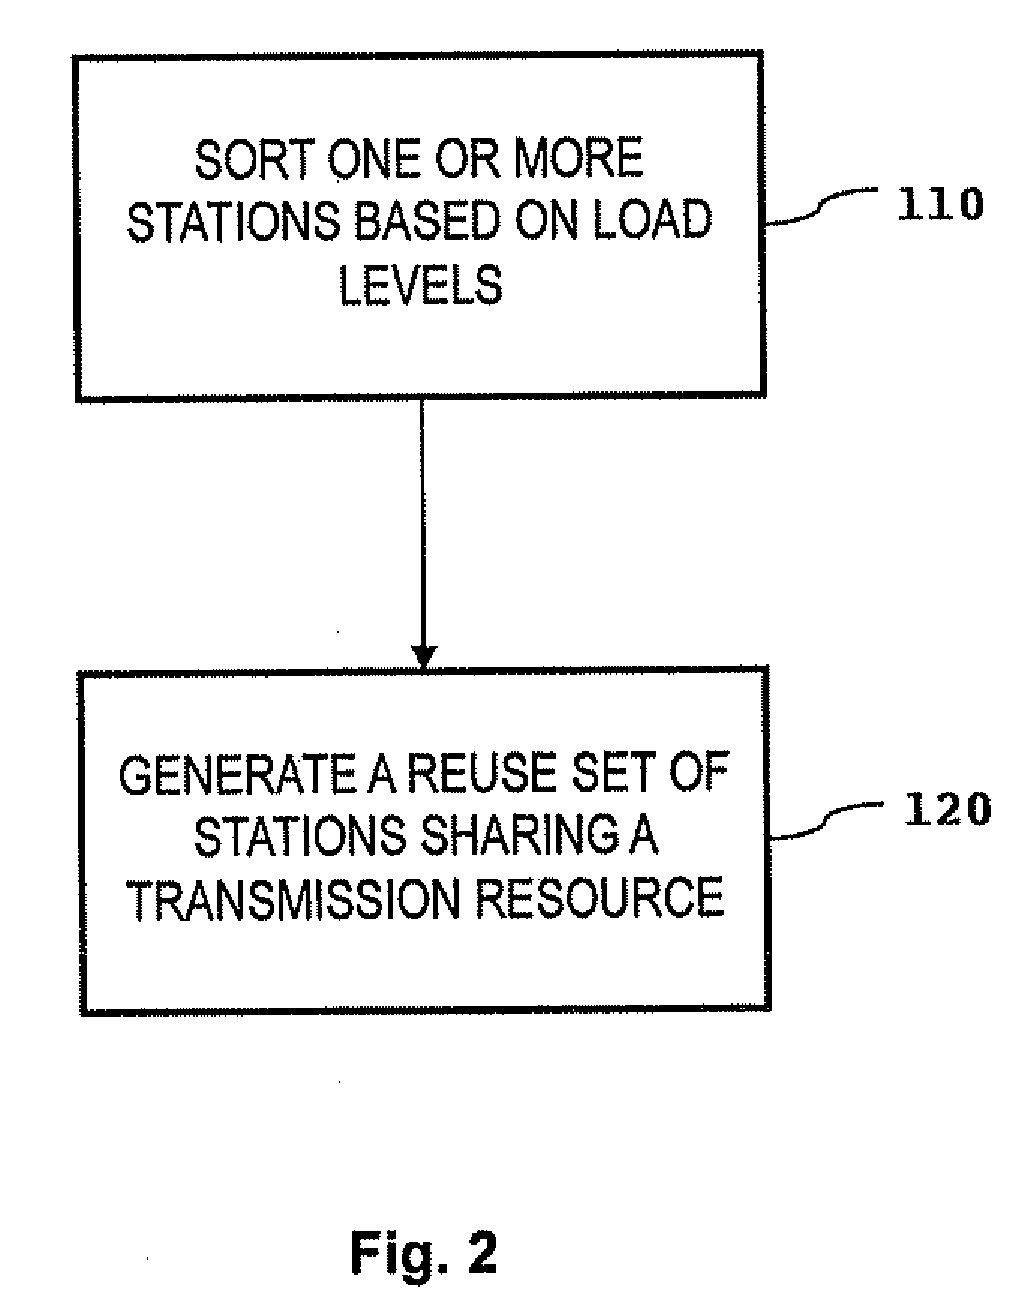 Reuse pattern network scheduling using load levels